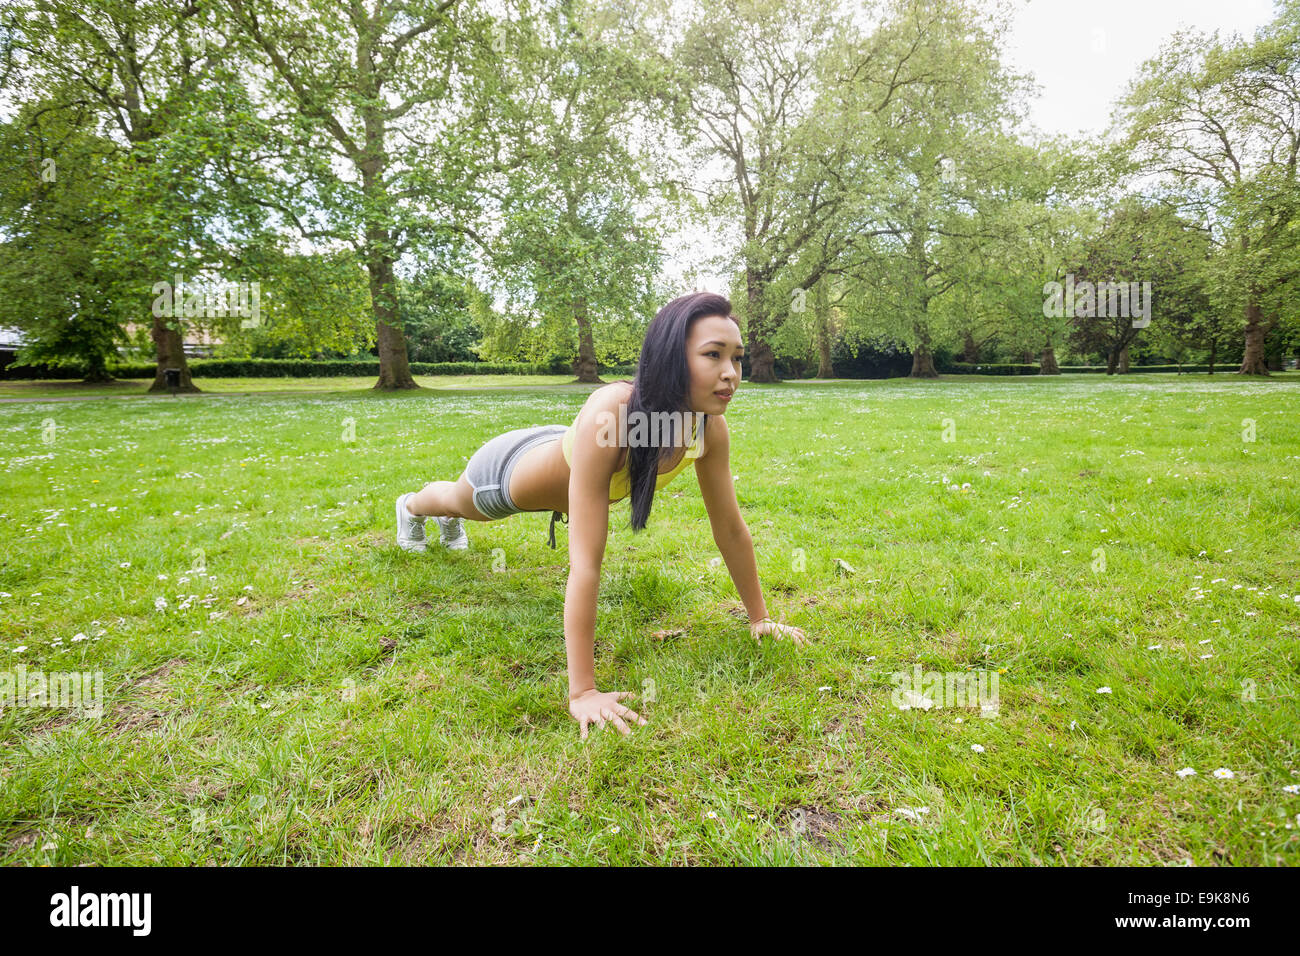 Full length of young fit woman performing pushups at park Stock Photo